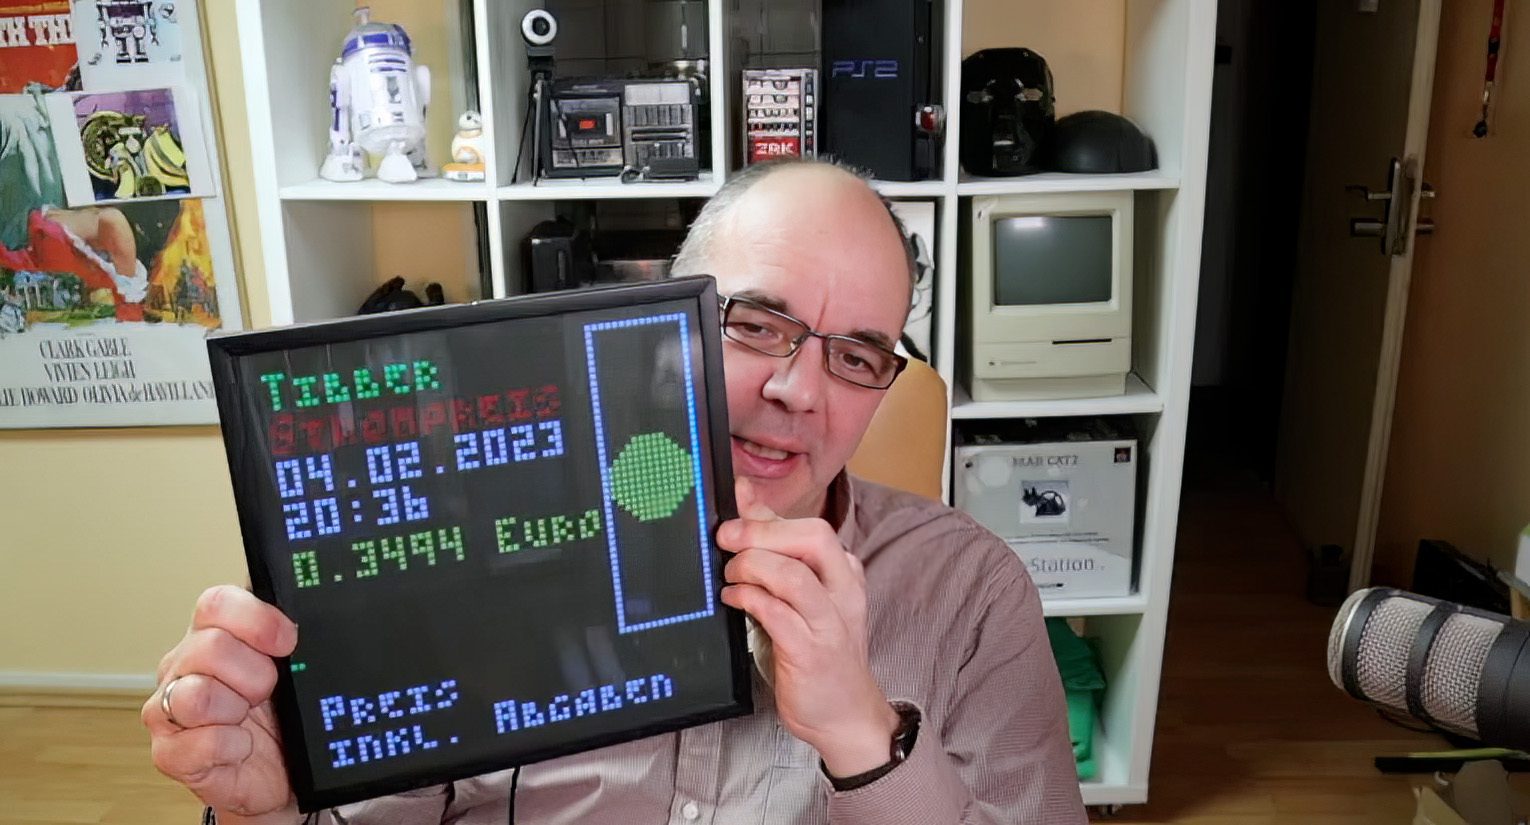 Tibber electricity price display by TechPirat